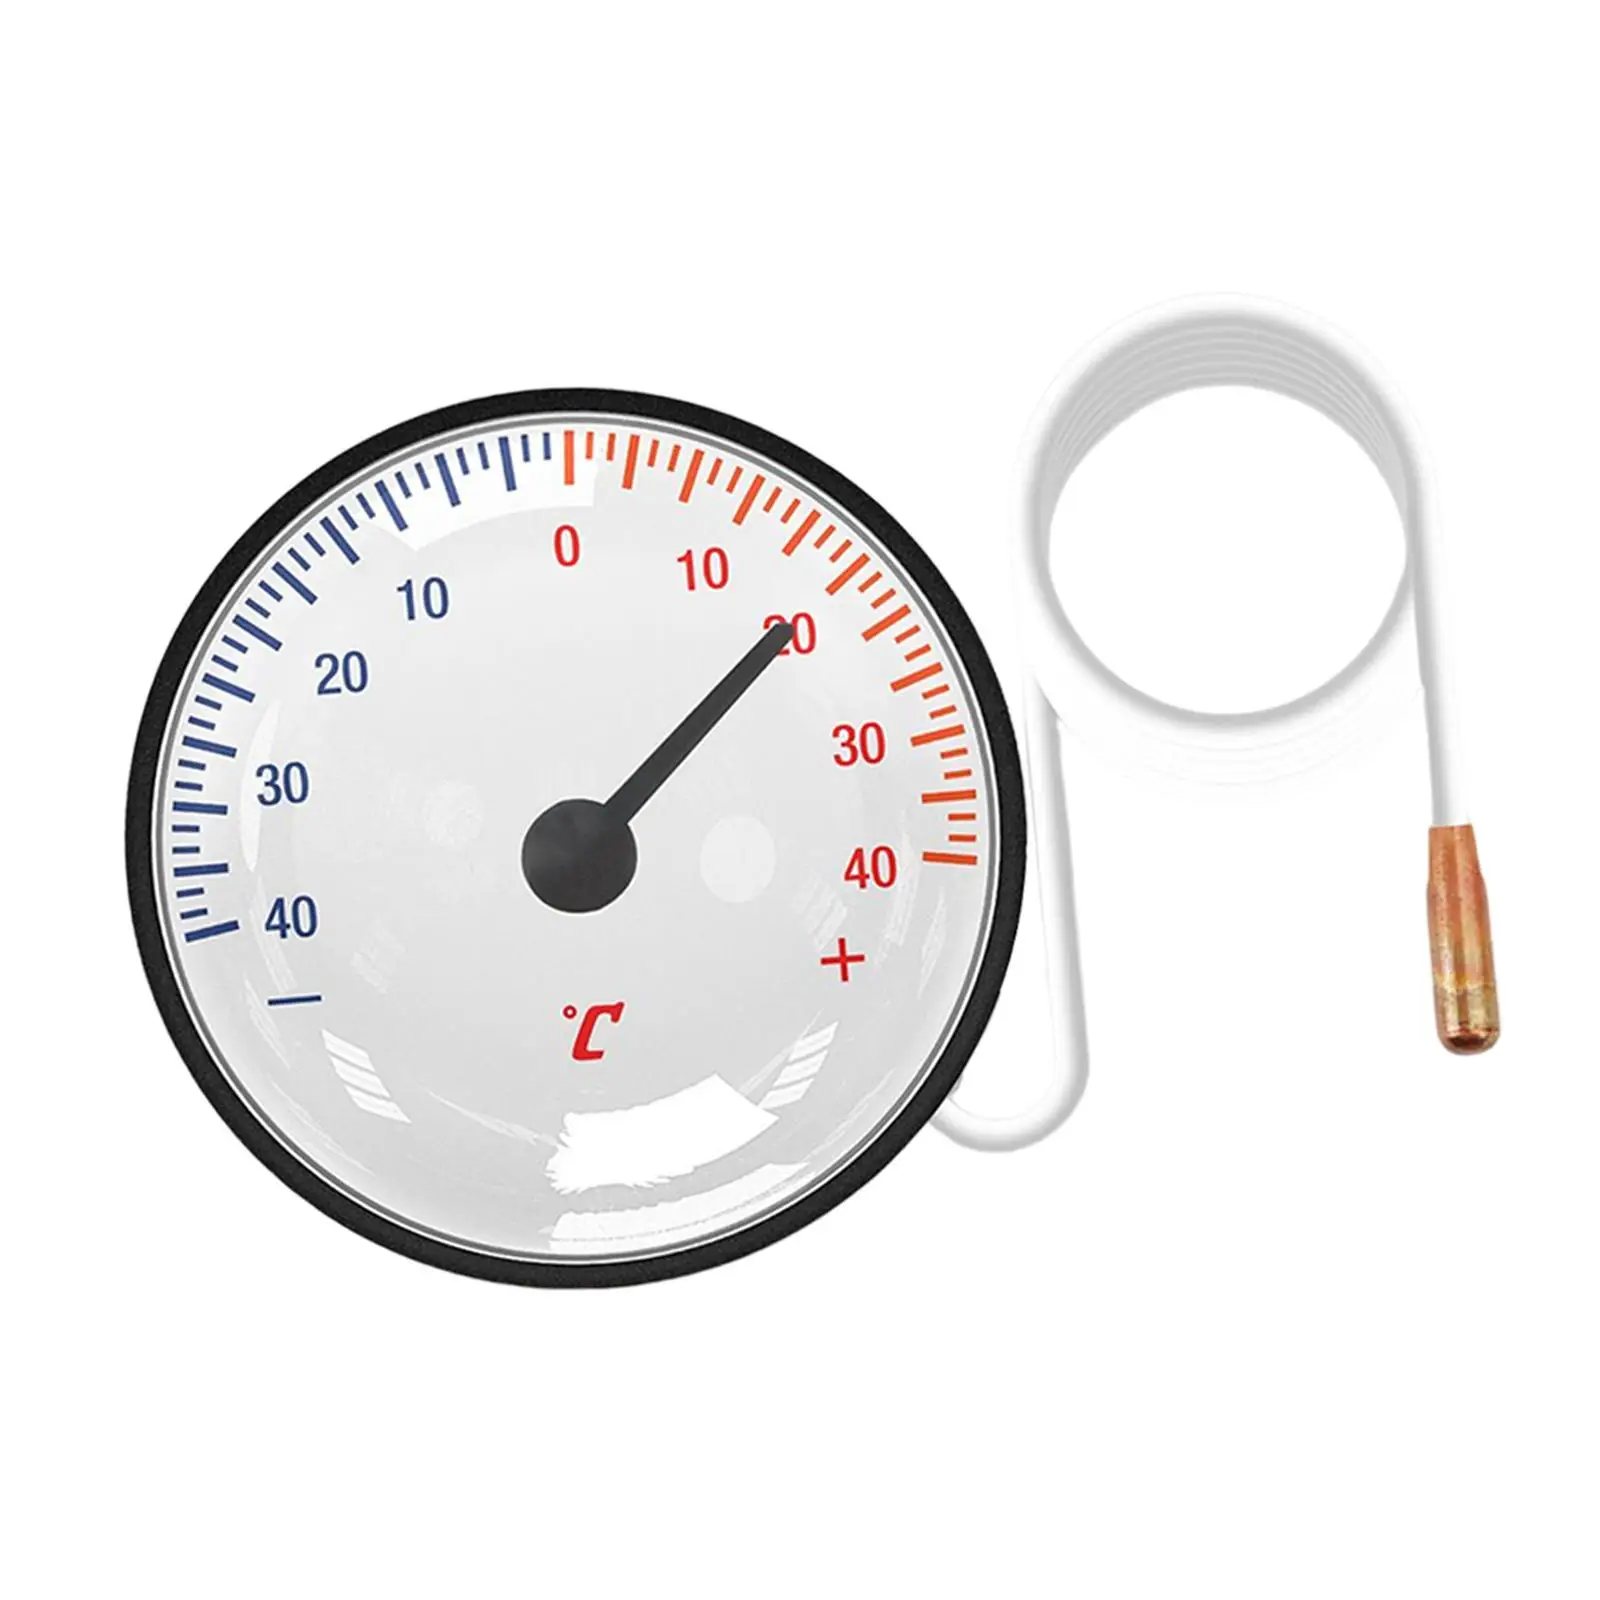 Dial Thermometer High Precision Temperature Monitor Gauge for Workshops Home Room